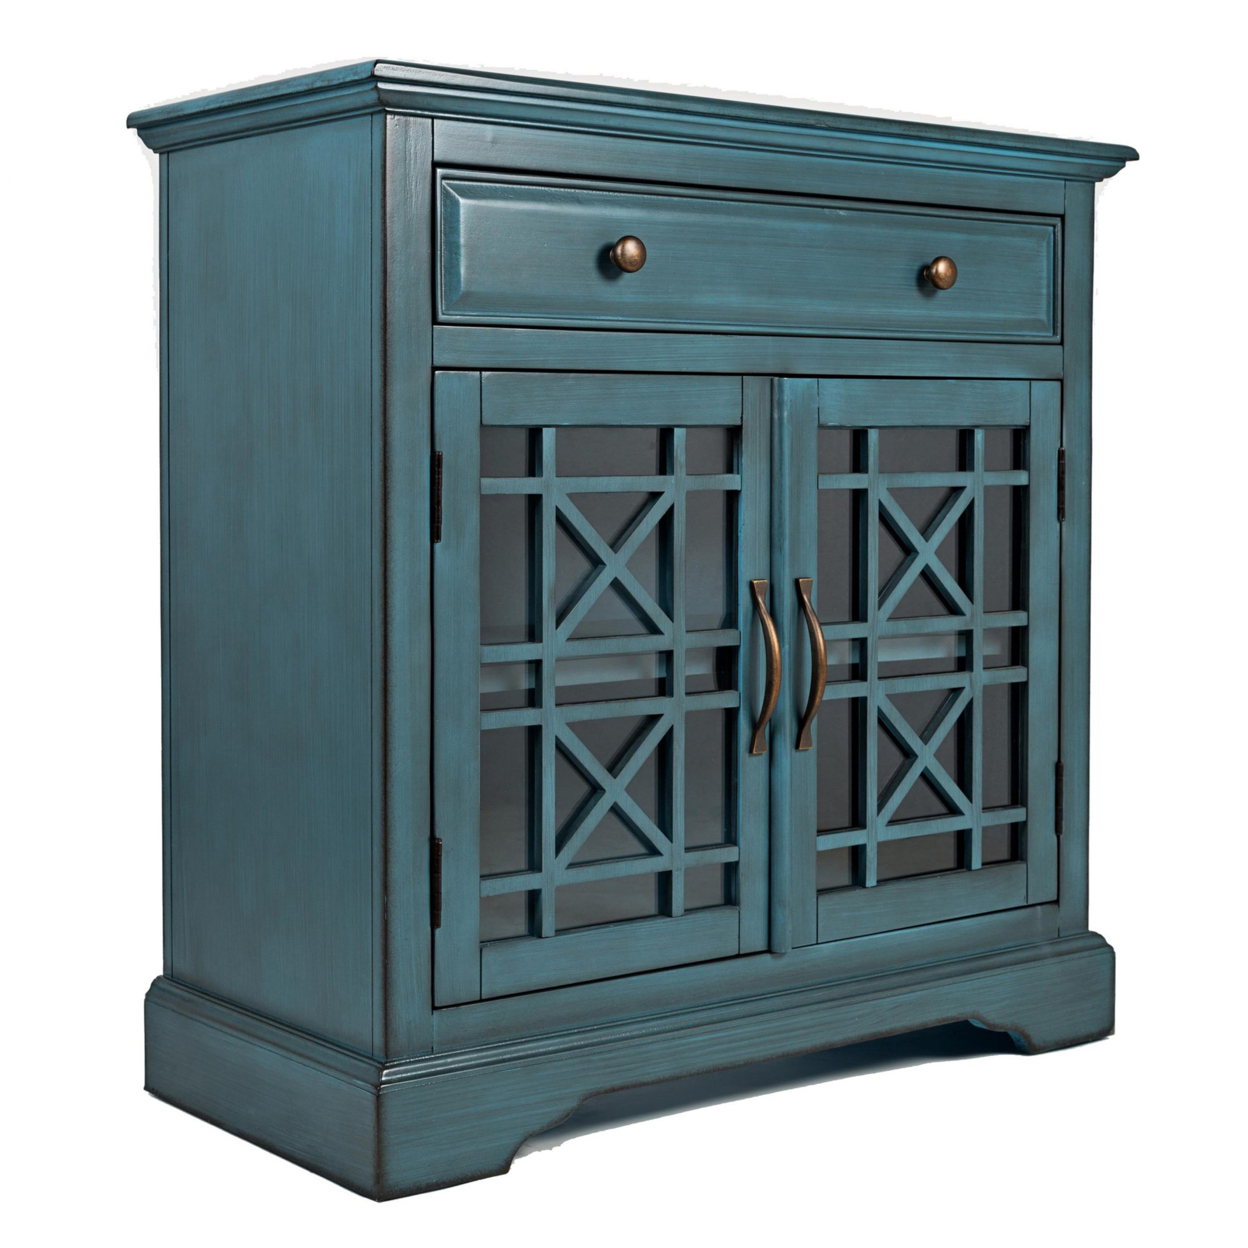 Craftsman Series 32 Inch Wooden Accent Cabinet with Fretwork Glass Front, Blue,Saltoro Sherpi